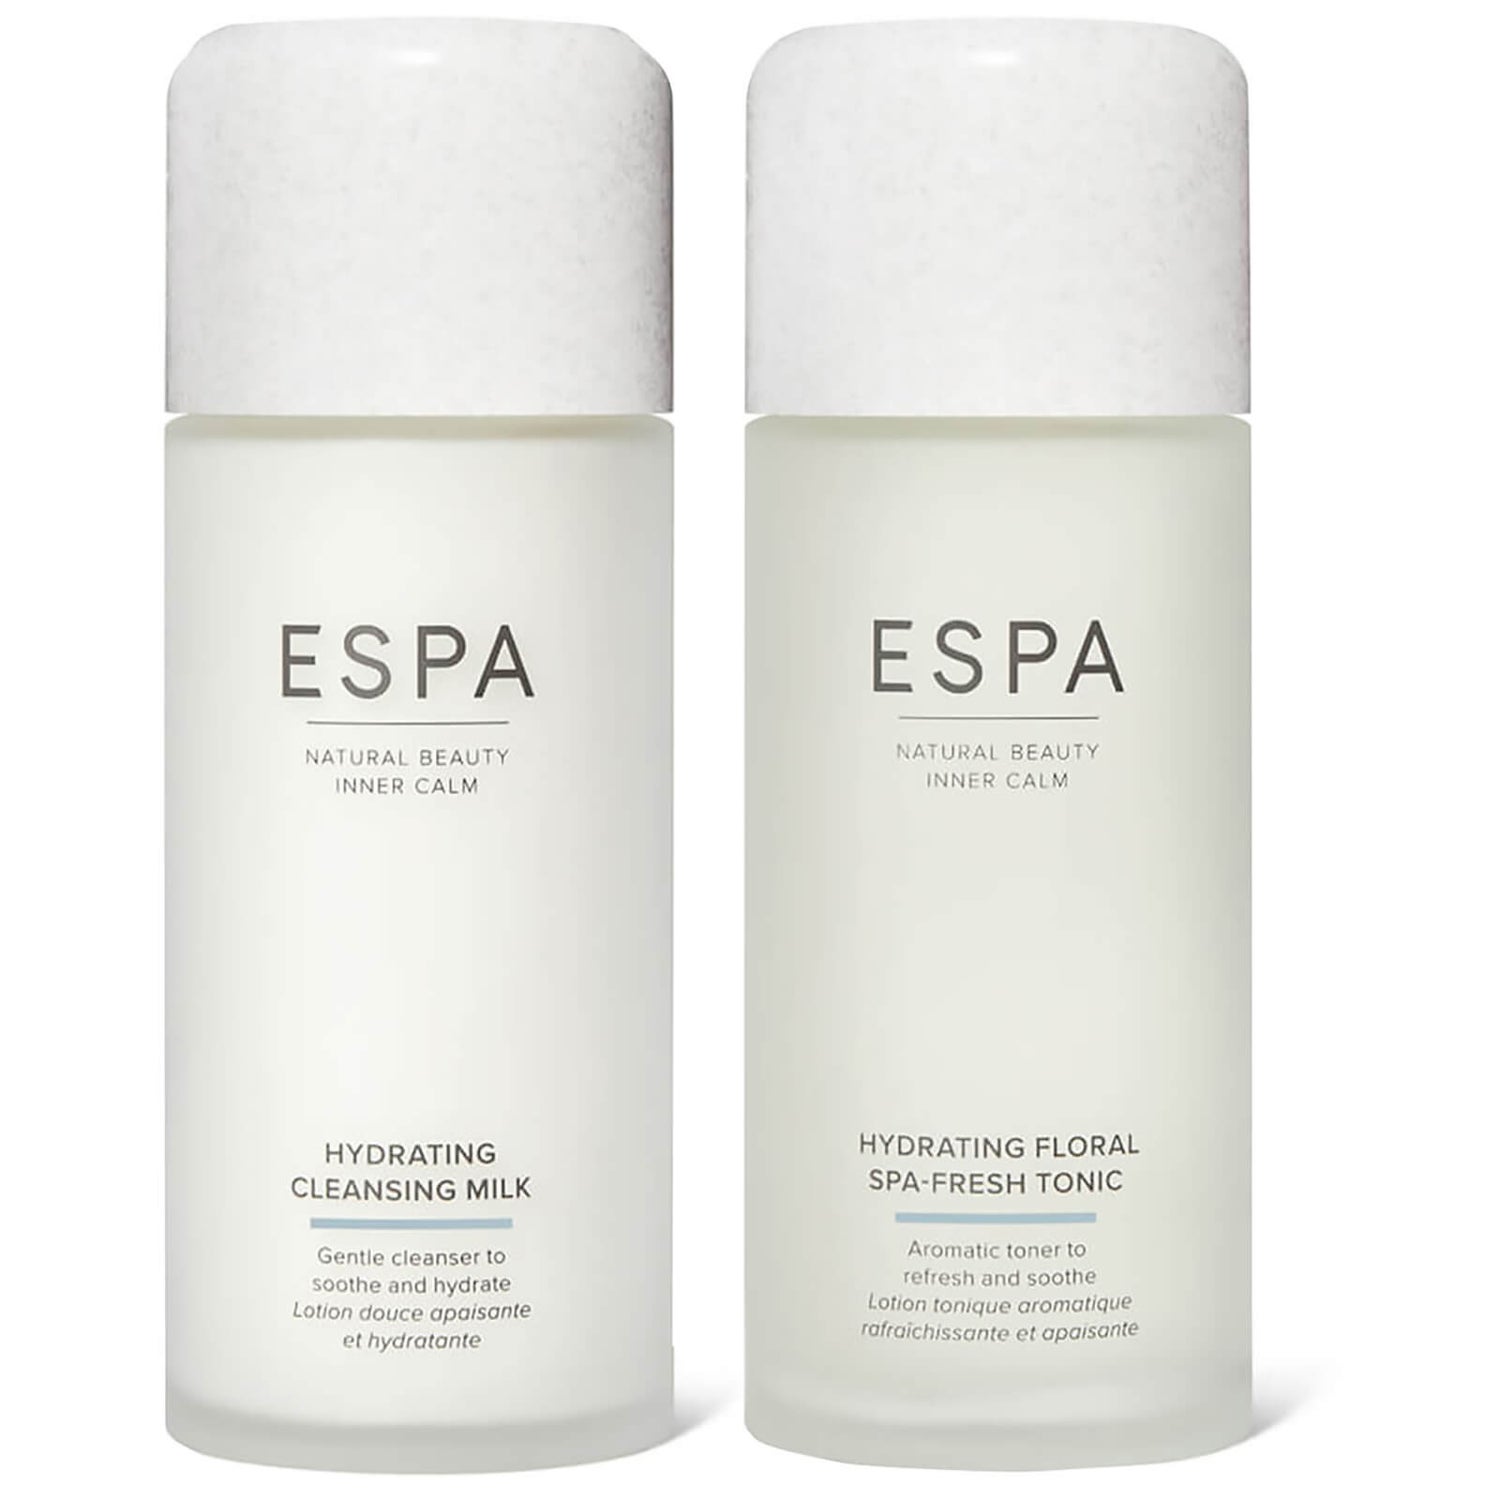 ESPA Hydrating Cleanse and Tone Duo (Worth $114.00)